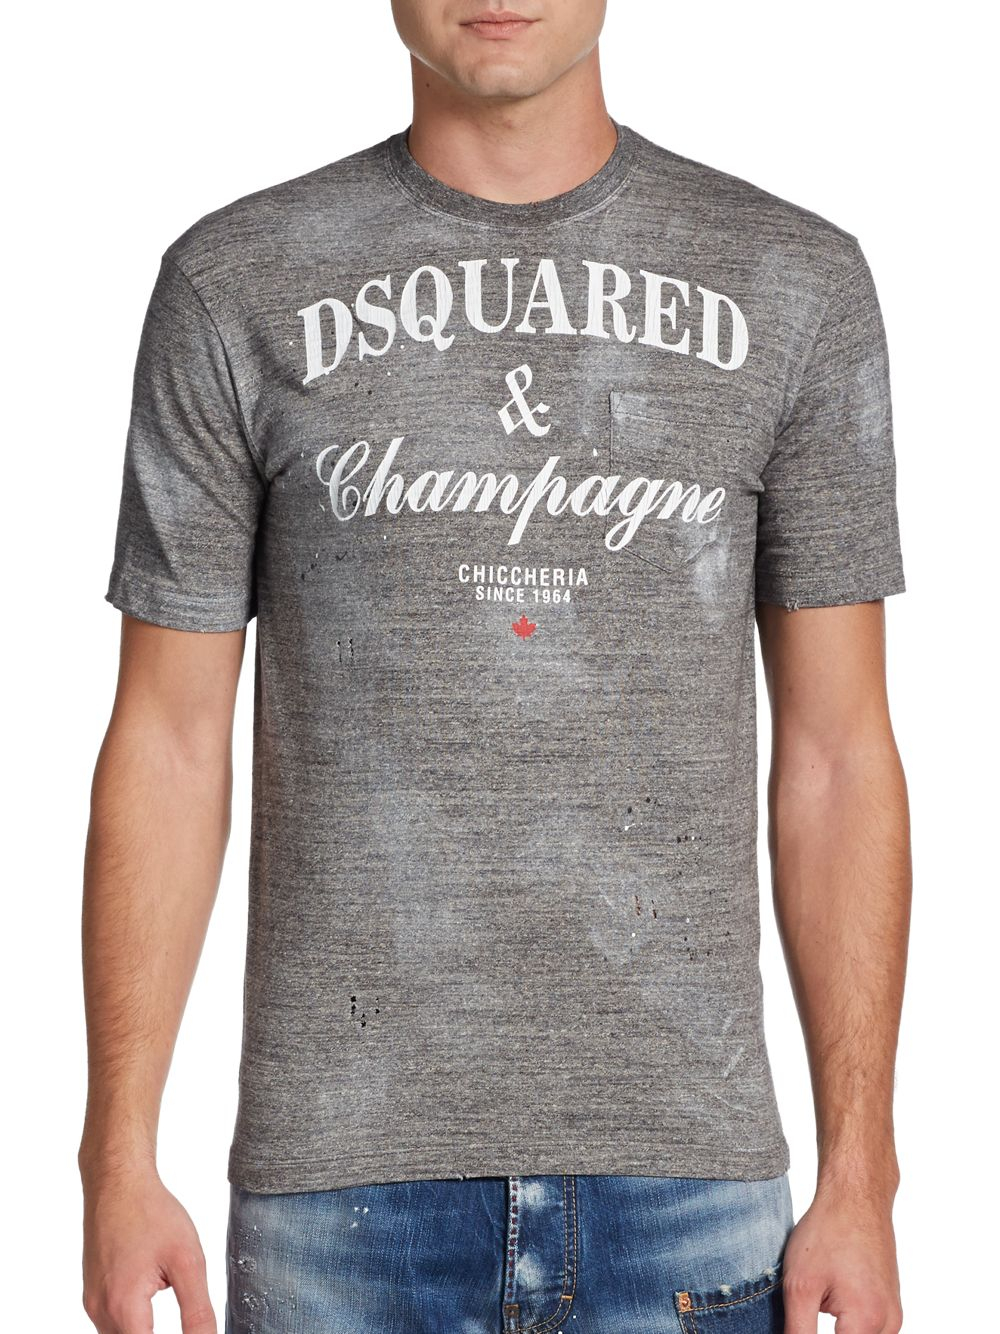 DSquared² Champagne Tshirt in 